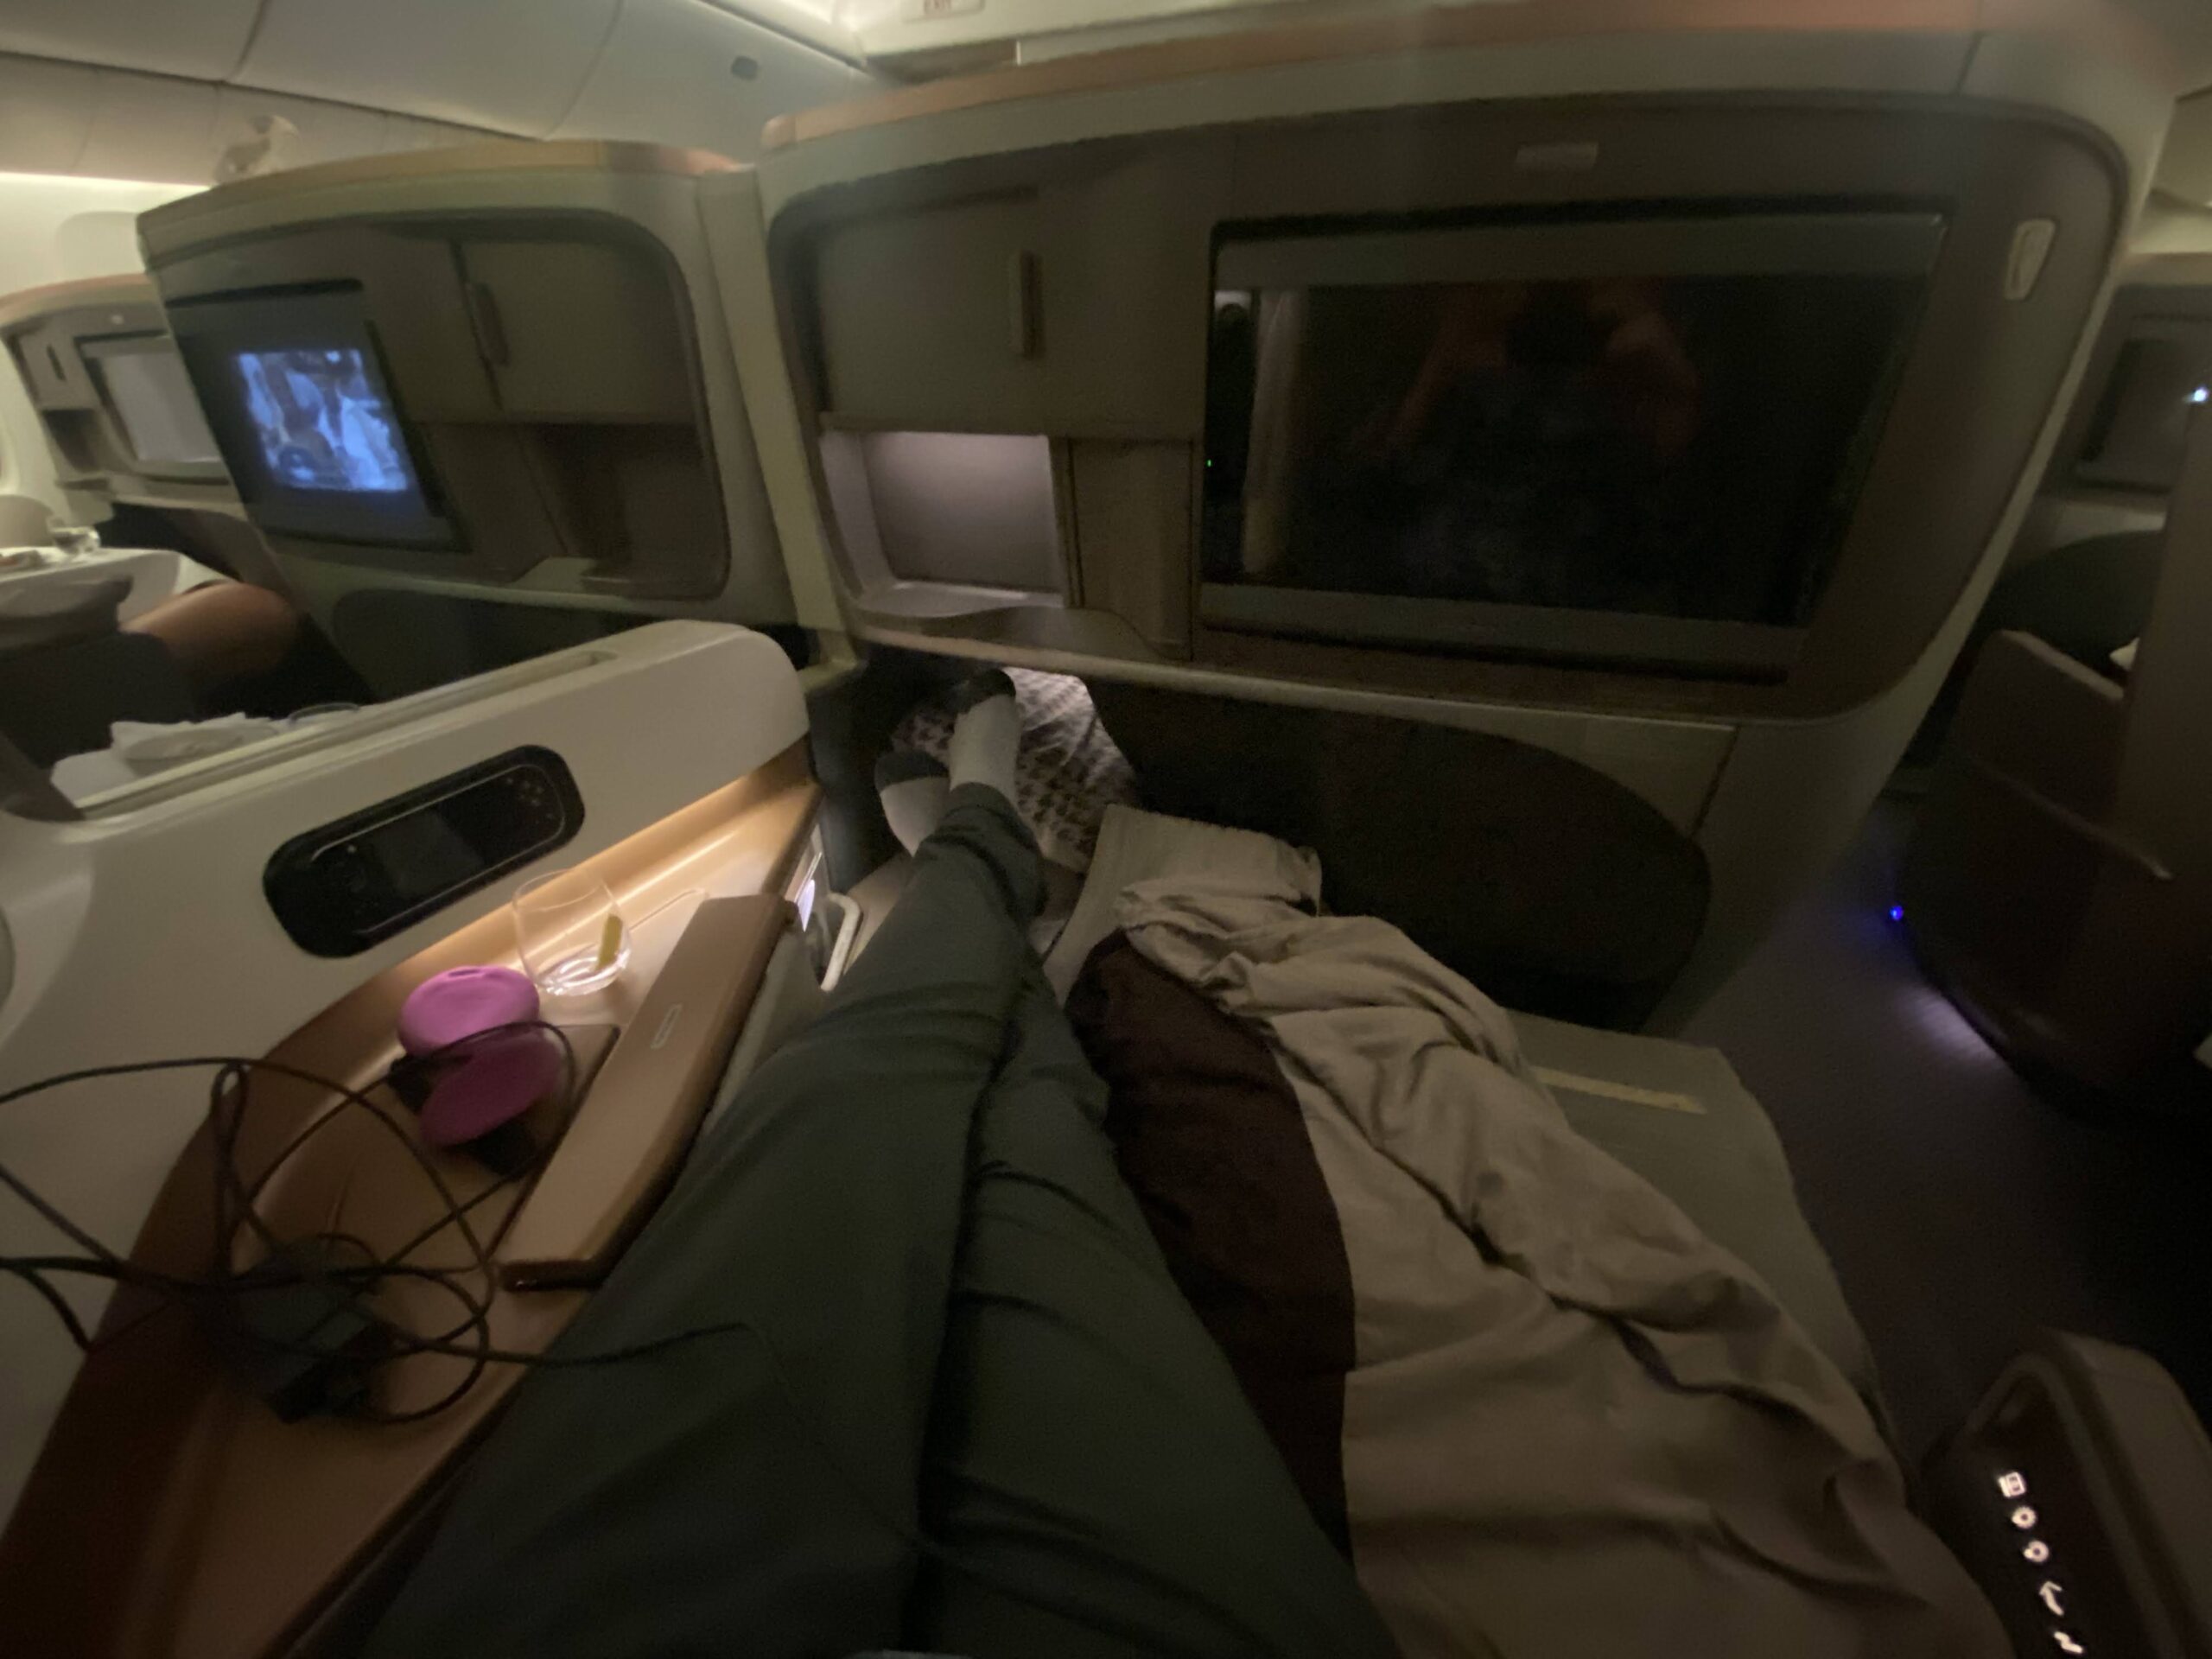 a person's legs on a bed in an airplane